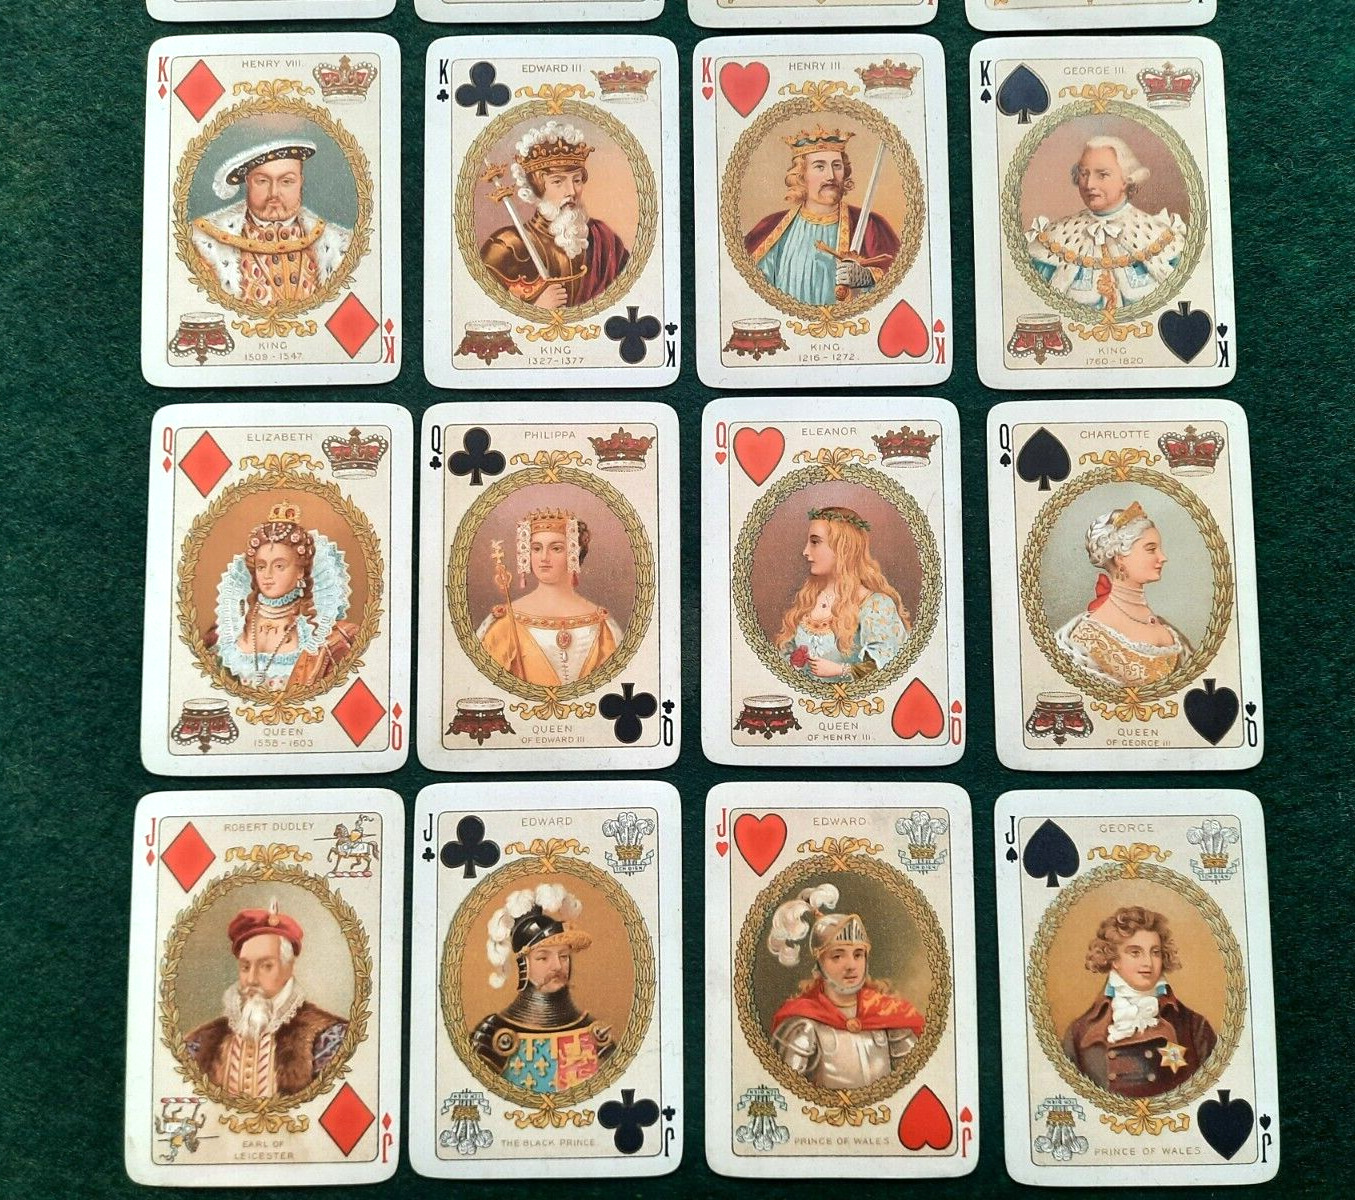 Antique 1897 Queen Victoria Dimond Jubilee Playing Cards Full deck